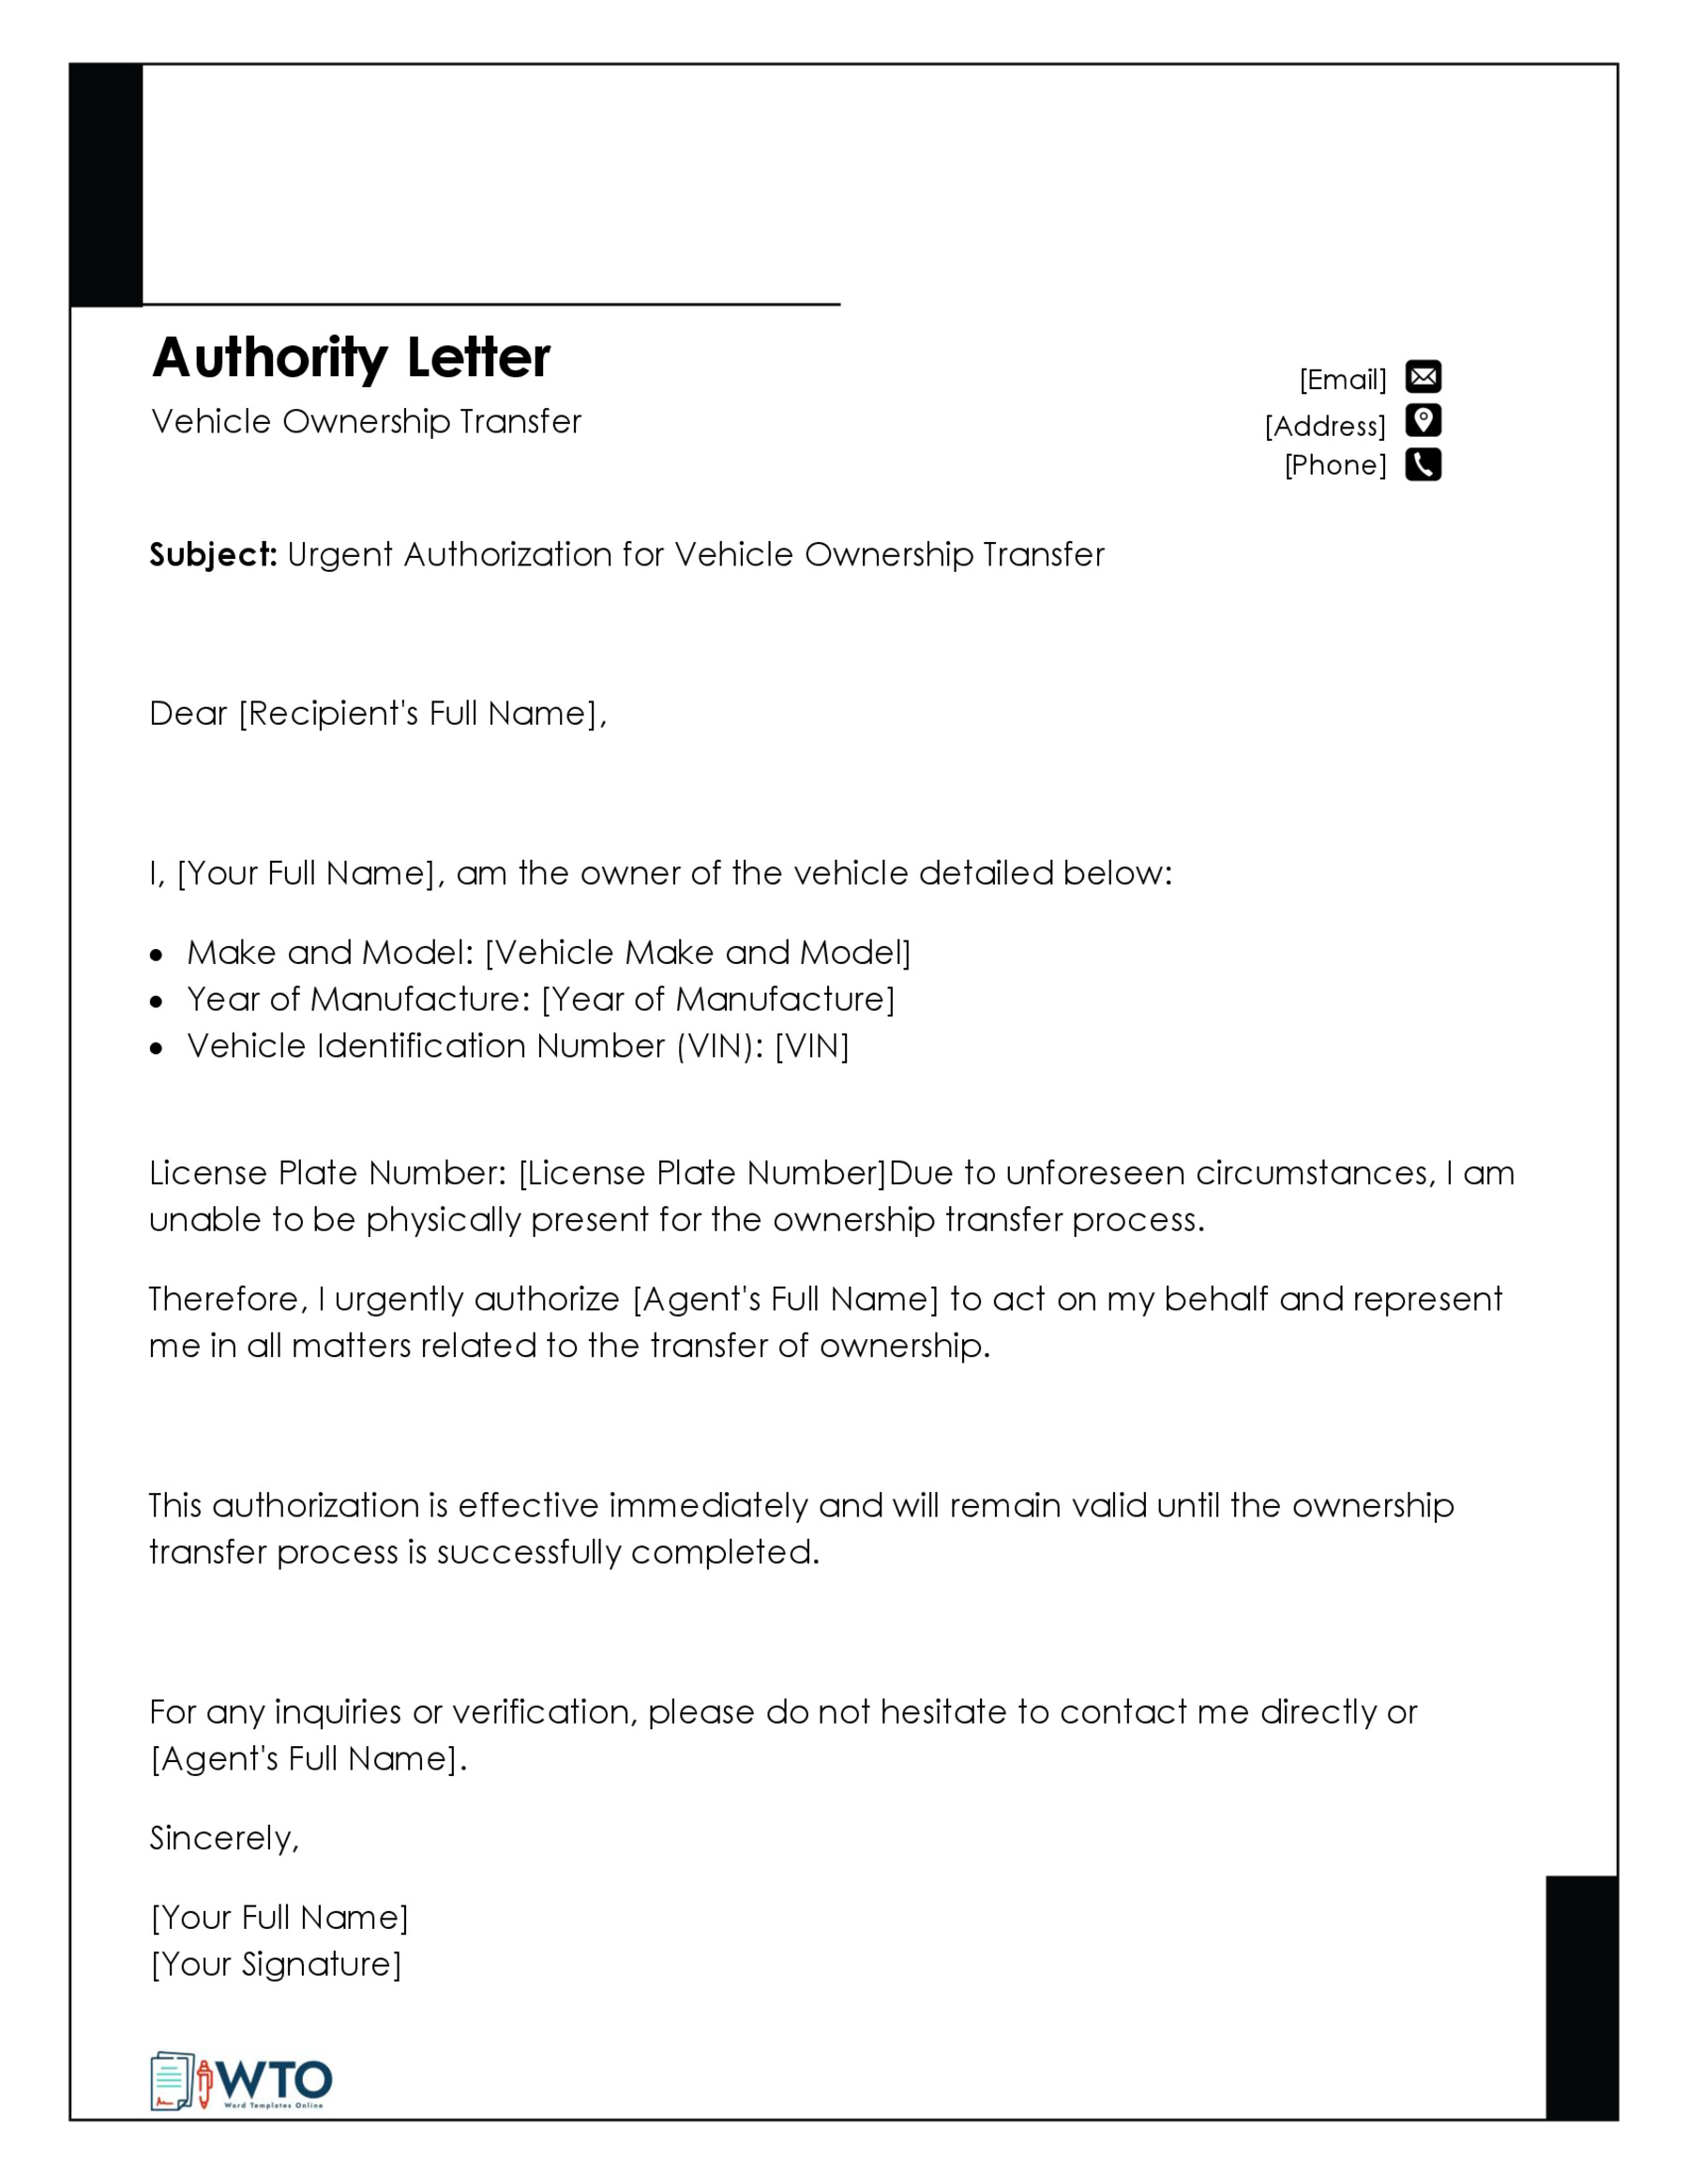 Authorization Letter Transfer Vehicle Ownership Letter Template-Ms Word Free Download